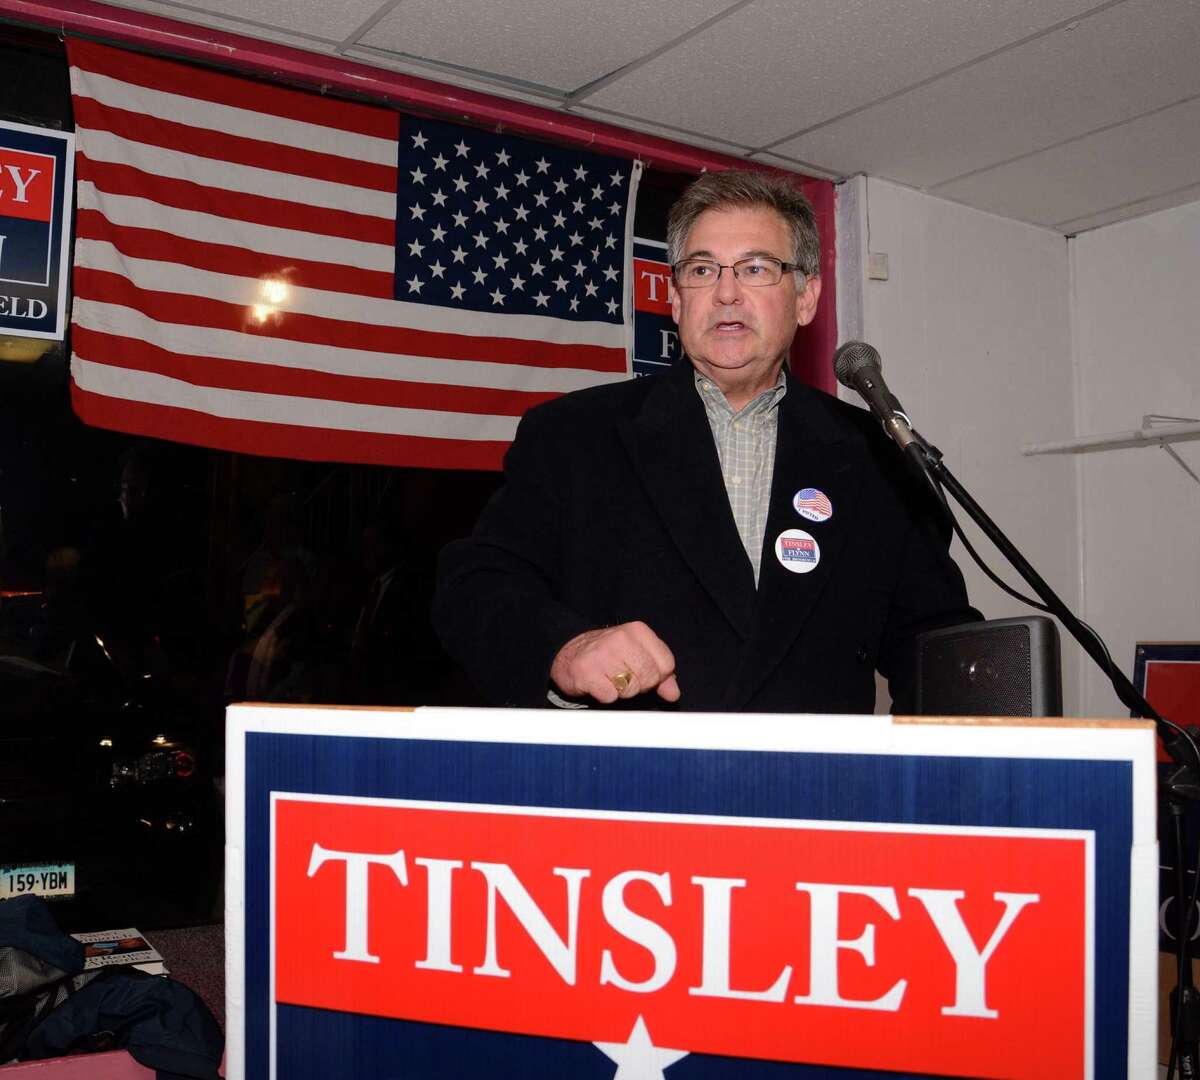 Brookfield's elected First Selectman, Republican Bill Tinsley, gives his victory speech at the Republican Headquarters in Brookfield on Tuesday, Nov. 5, 2013.